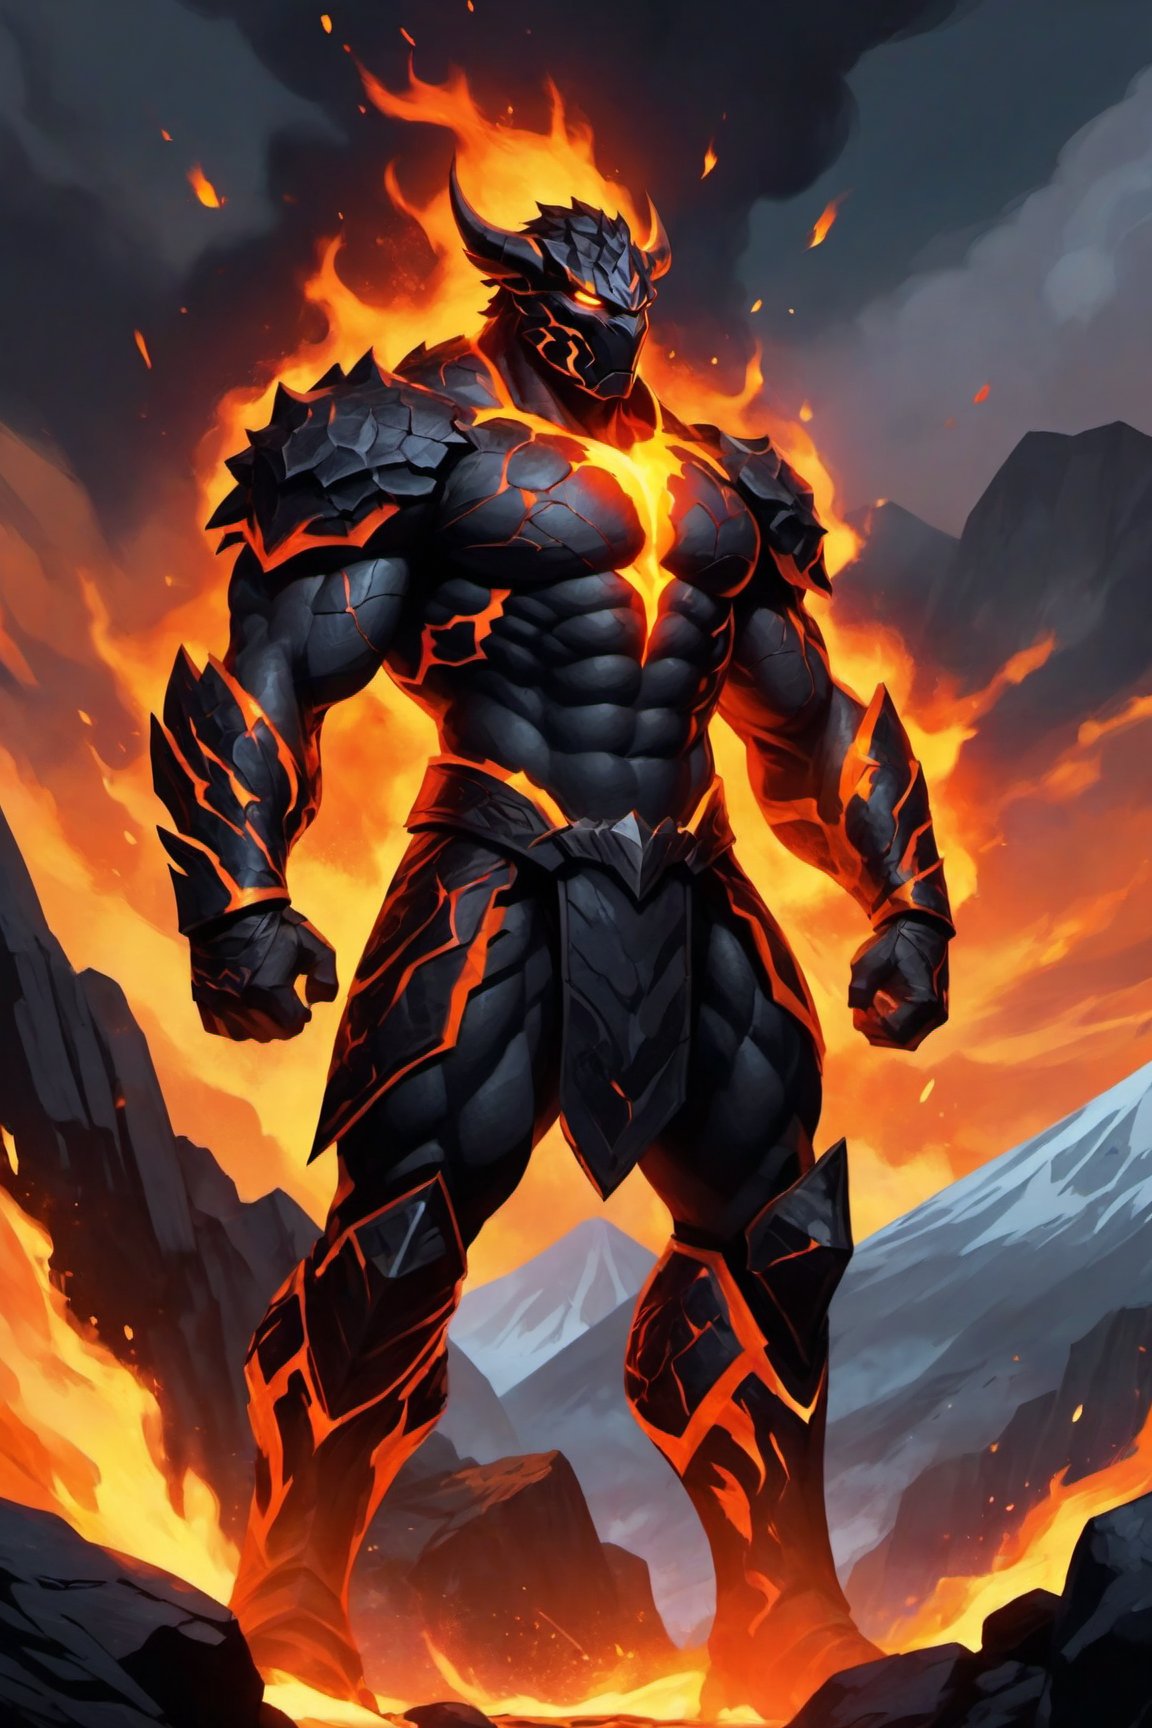 (masterpiece, best quality), (8K, UHD), 

"Create an image of a powerful hero made of volcanic rock, standing tall amidst a molten landscape. His body is formed from rugged, dark volcanic stone, with glowing veins of molten lava coursing through his frame, illuminating his immense strength. His eyes blaze with fiery intensity, and his hands are surrounded by a radiant aura of heat and magma. The hero's presence exudes raw power and resilience, with cracks in his rocky exterior revealing the molten core within. He stands ready for battle, with molten lava dripping from his fists and a background of erupting volcanoes and rivers of lava highlighting his formidable nature."

vibrant colors, dark lighting, glowing, ,Comics style pony